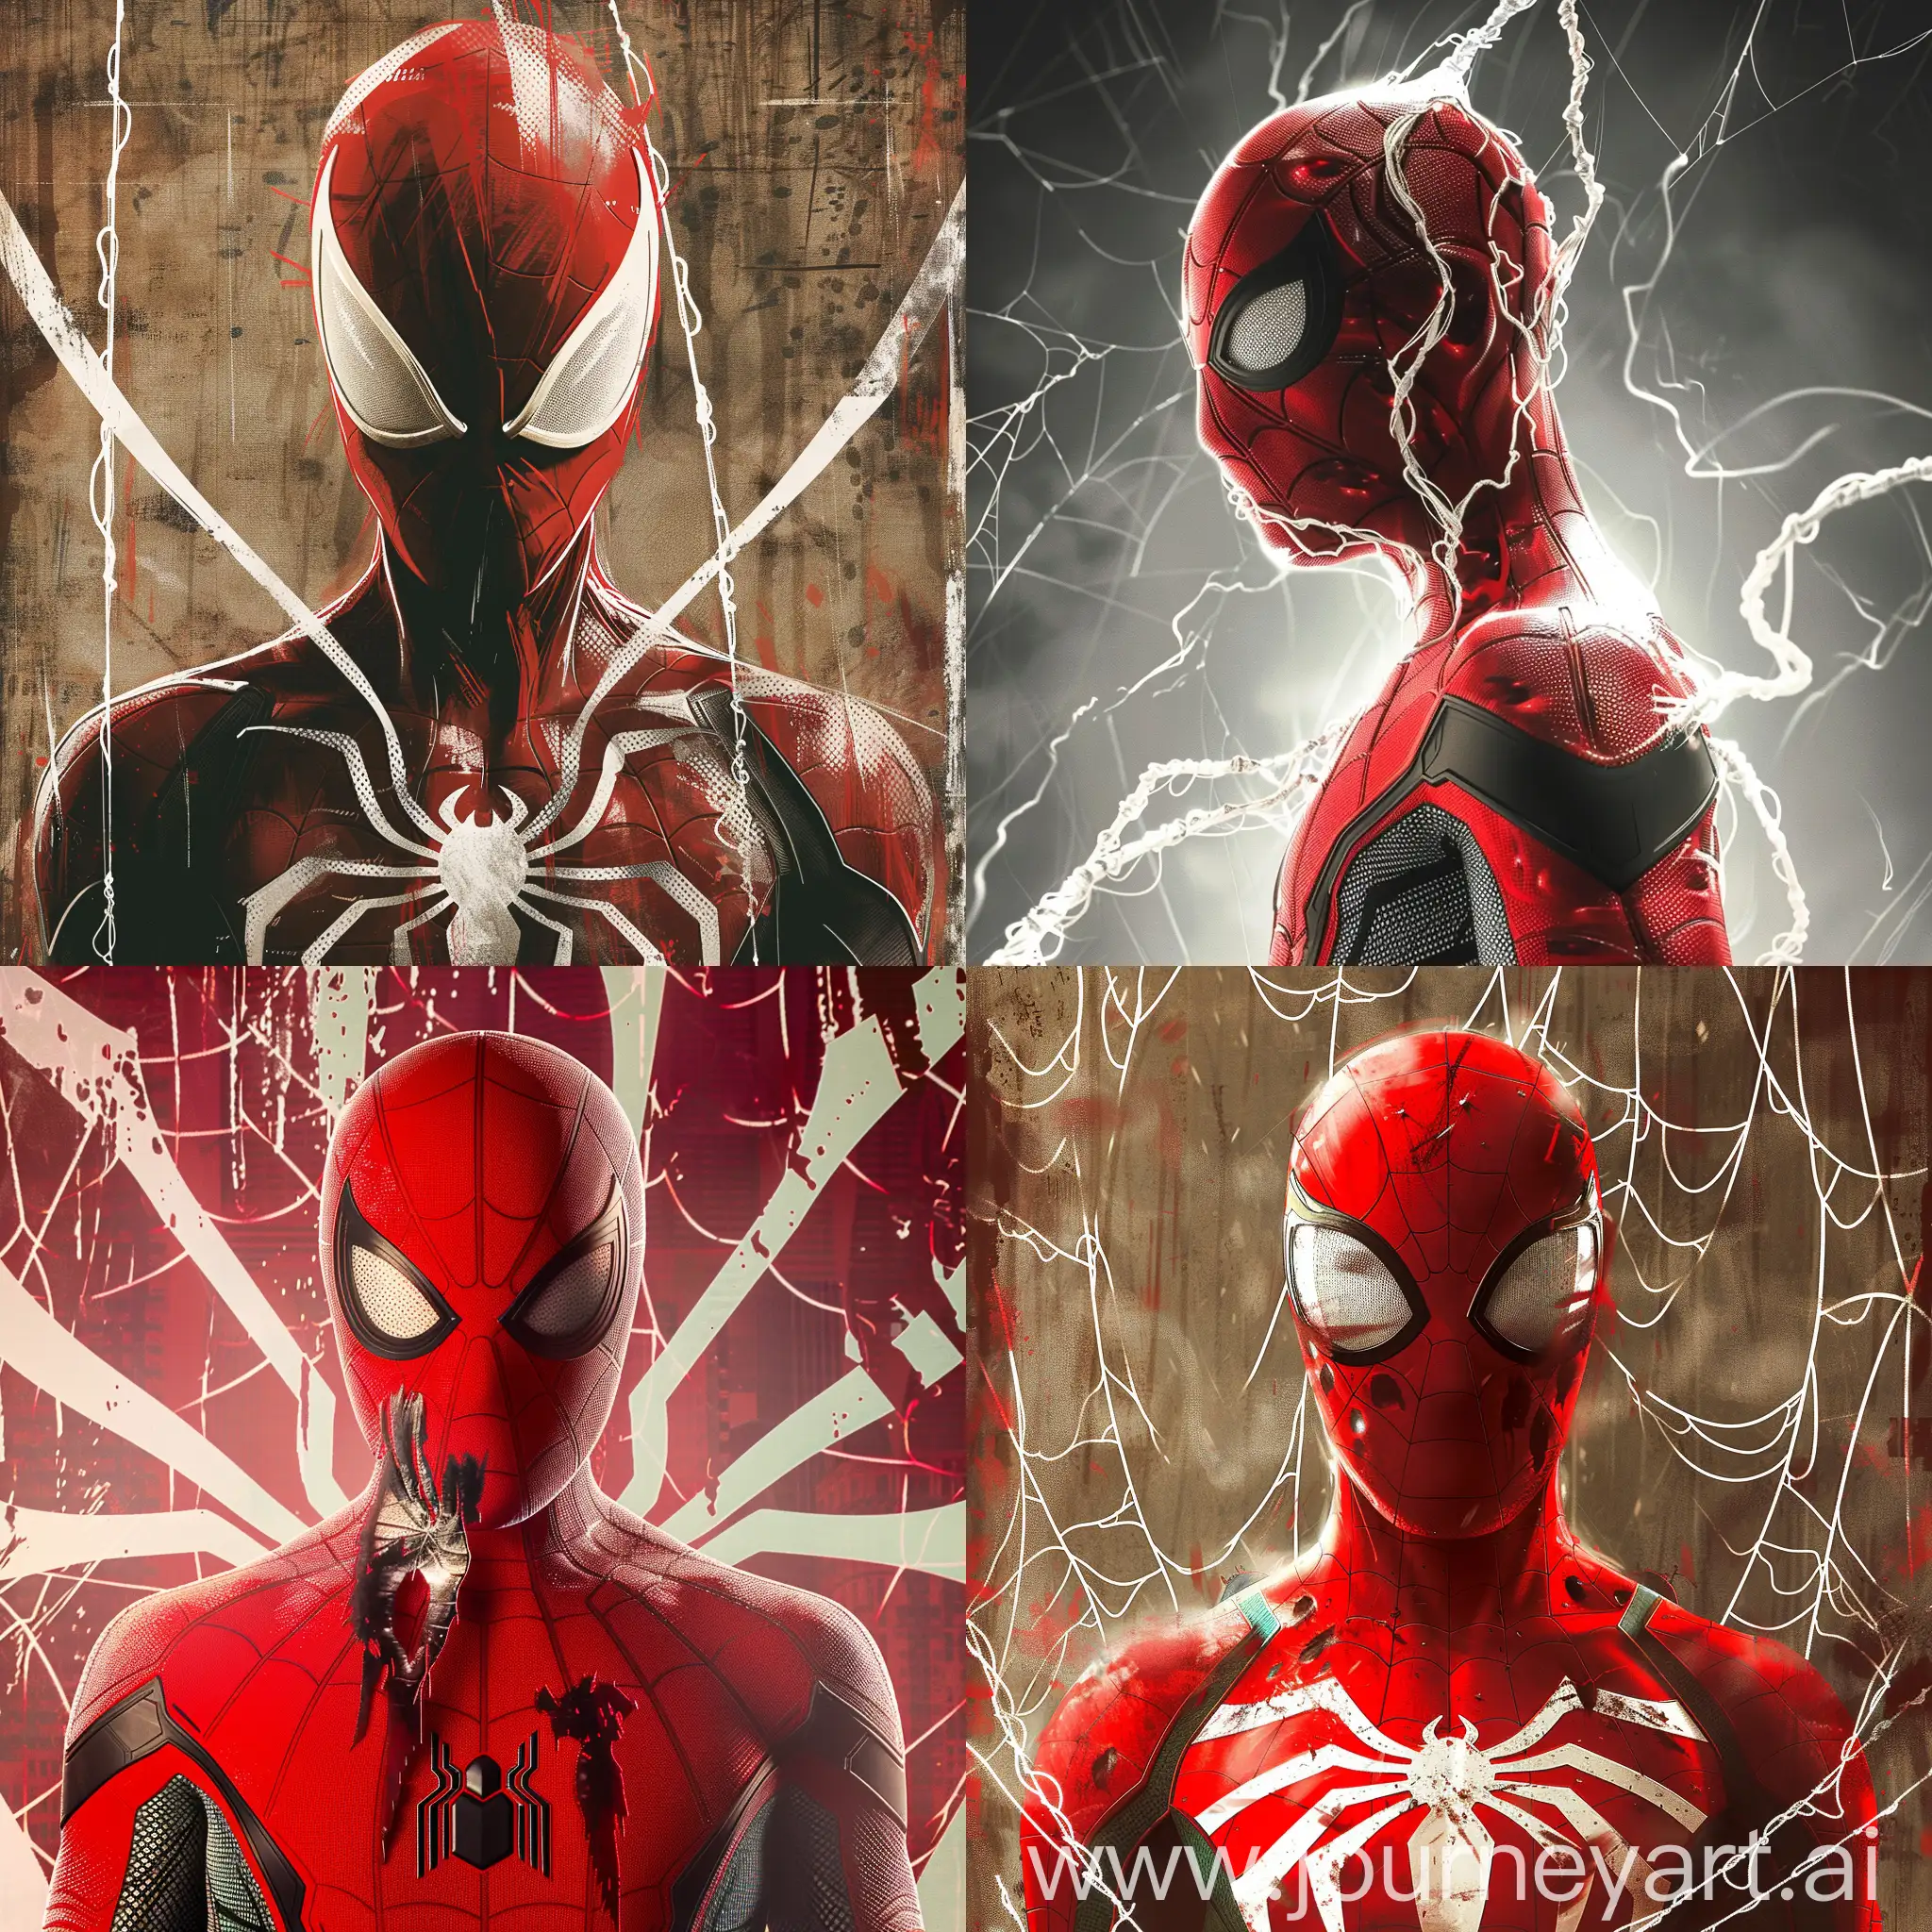 Cinematic-SpiderMan-Movie-Poster-with-Advanced-Suit-and-Expressive-Mask